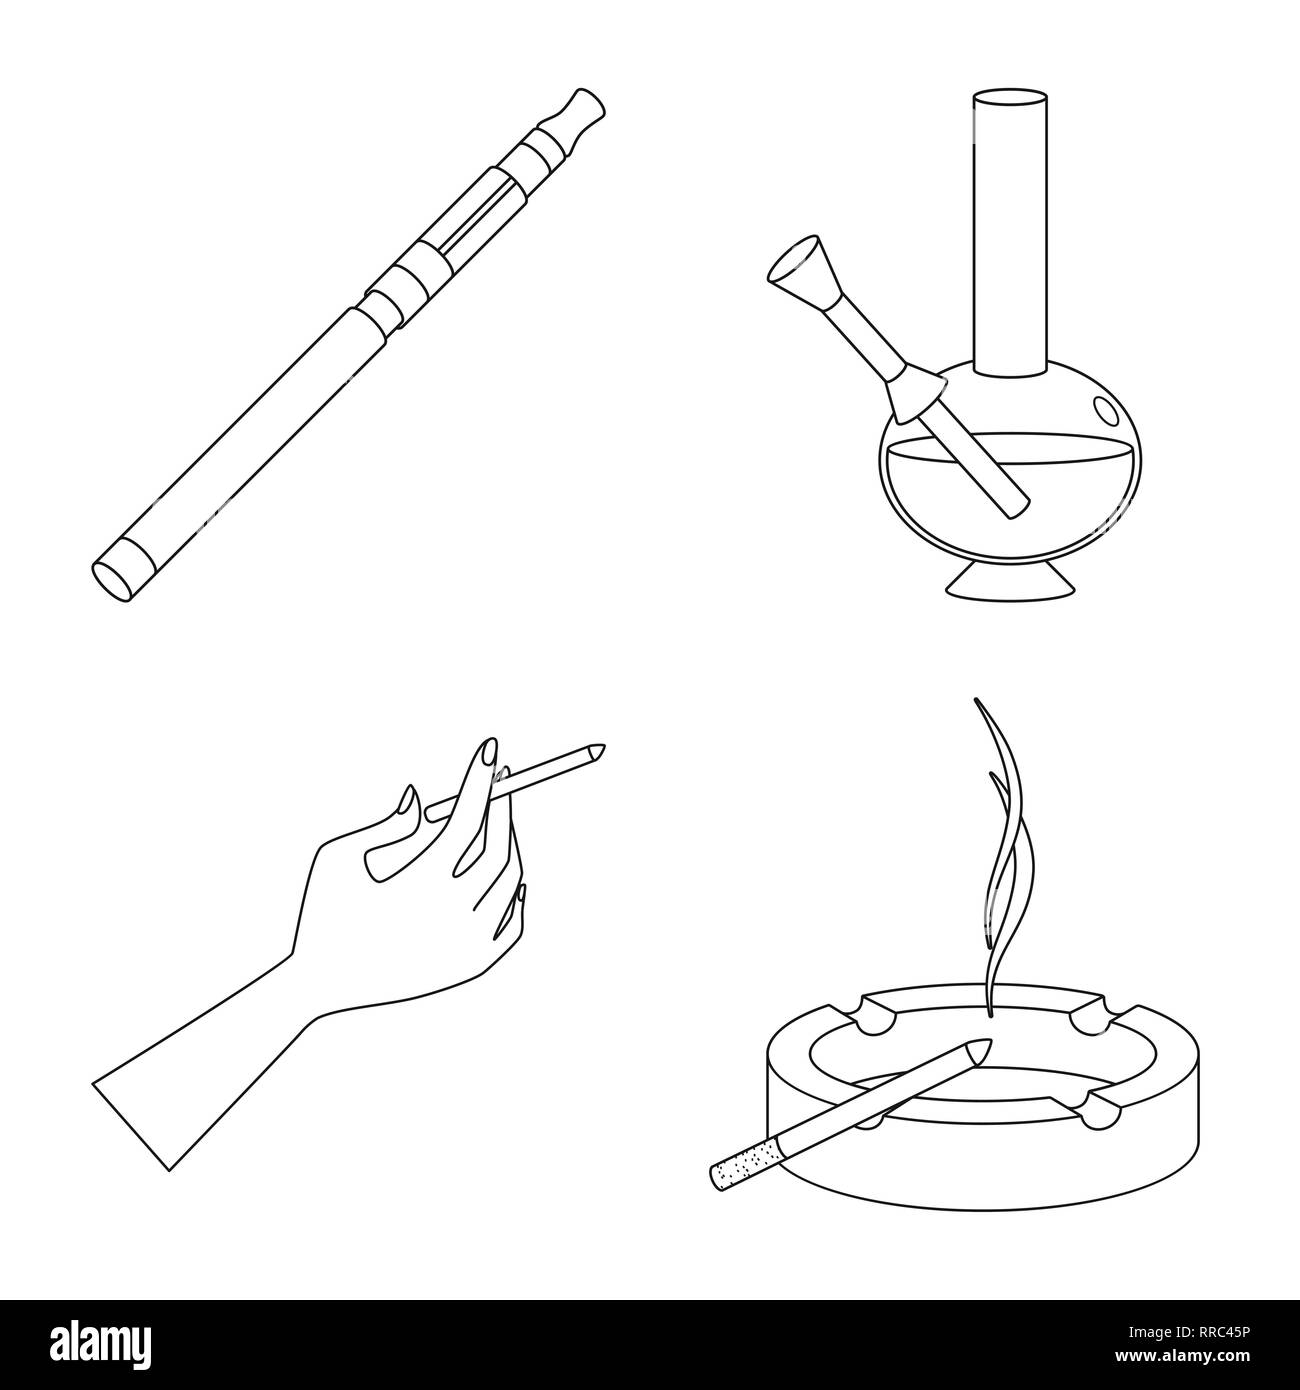 electronic,hookah,hand,ashtray,filter,bong,arm,glass,paper,break,plastic,vapor,pipe,bad,vaporizer,flask,fire,abuse,alternative,men,addict,capacity,finger,addiction,treatment,apparatus,gesture,hold,health,nicotine,smoke,statistics,refuse,stop,anti,habit,cigarette,tobacco,set,vector,icon,illustration,isolated,collection,design,element,graphic,sign,outline,line Vector Vectors , Stock Vector